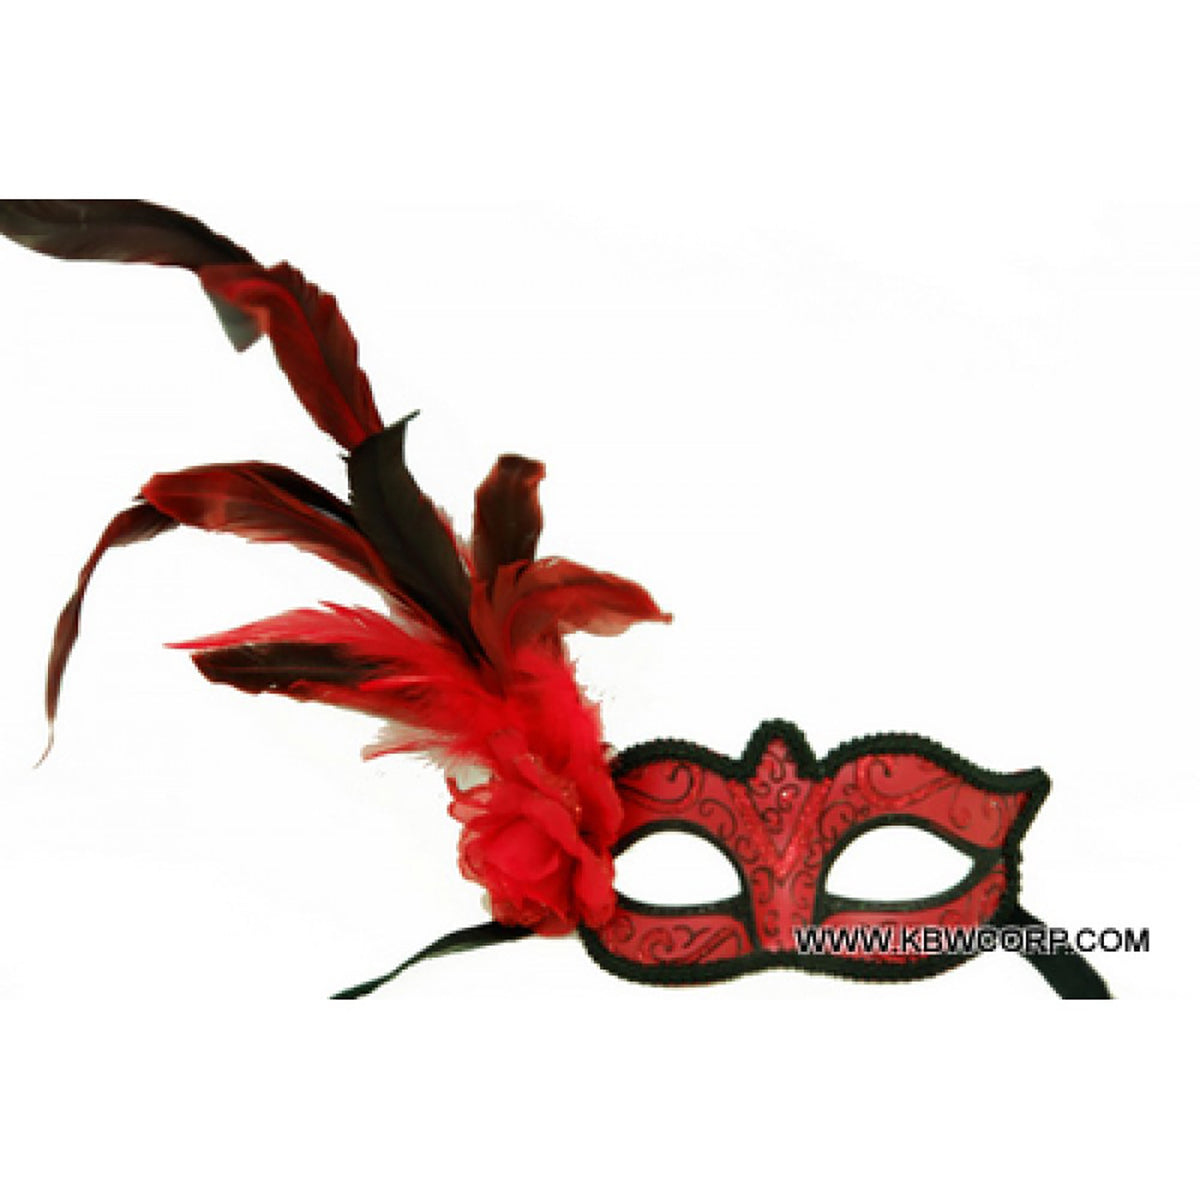 KBW GLOBAL CORP Costume Accessories Red Flower Venetian Mask with Feather, 1 Count 831687005411